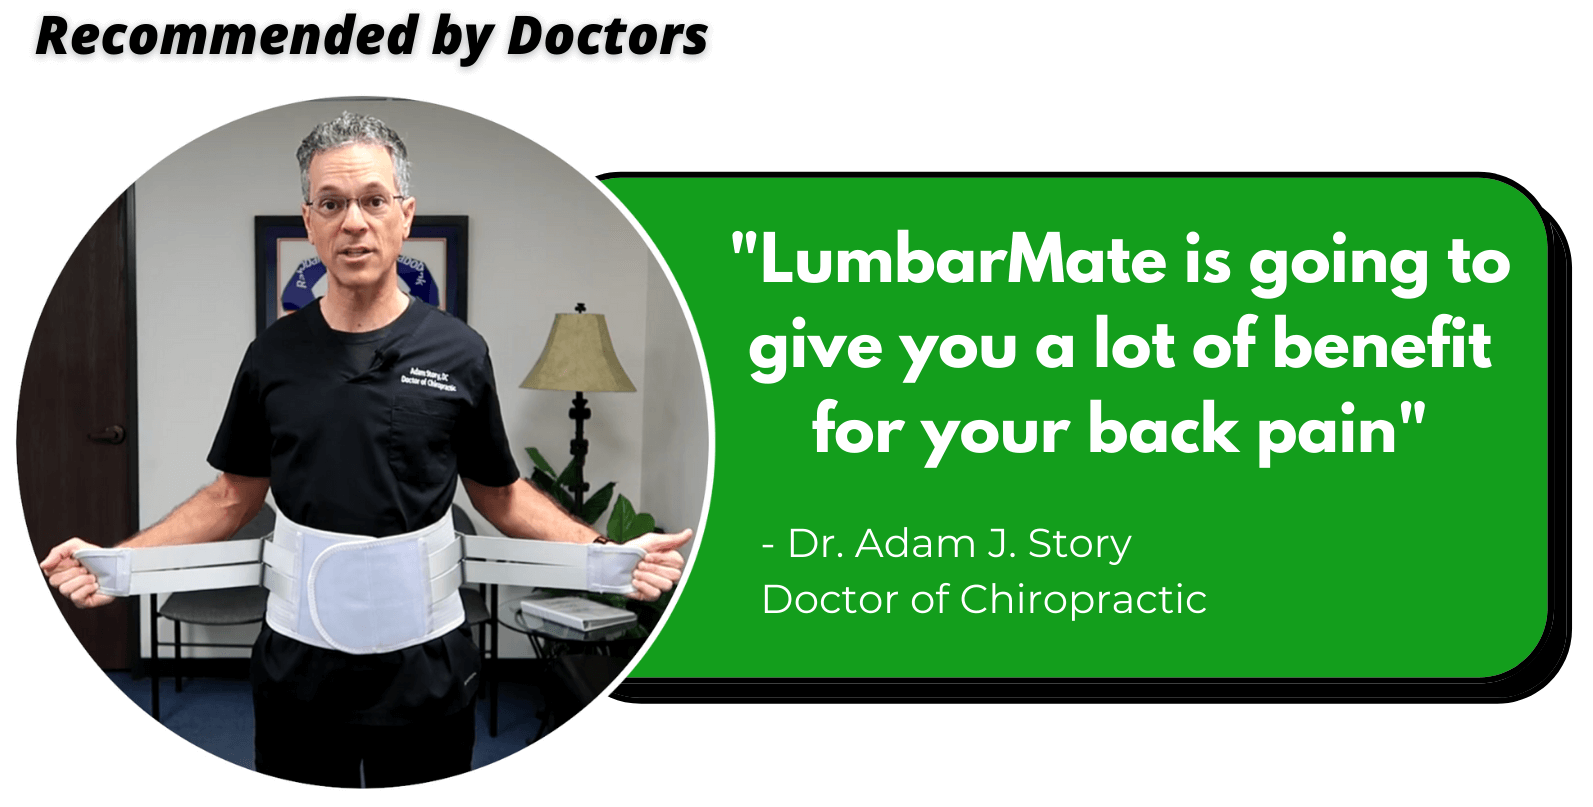 Lumbarmate is recommended by chiropractors in relieving back pain.